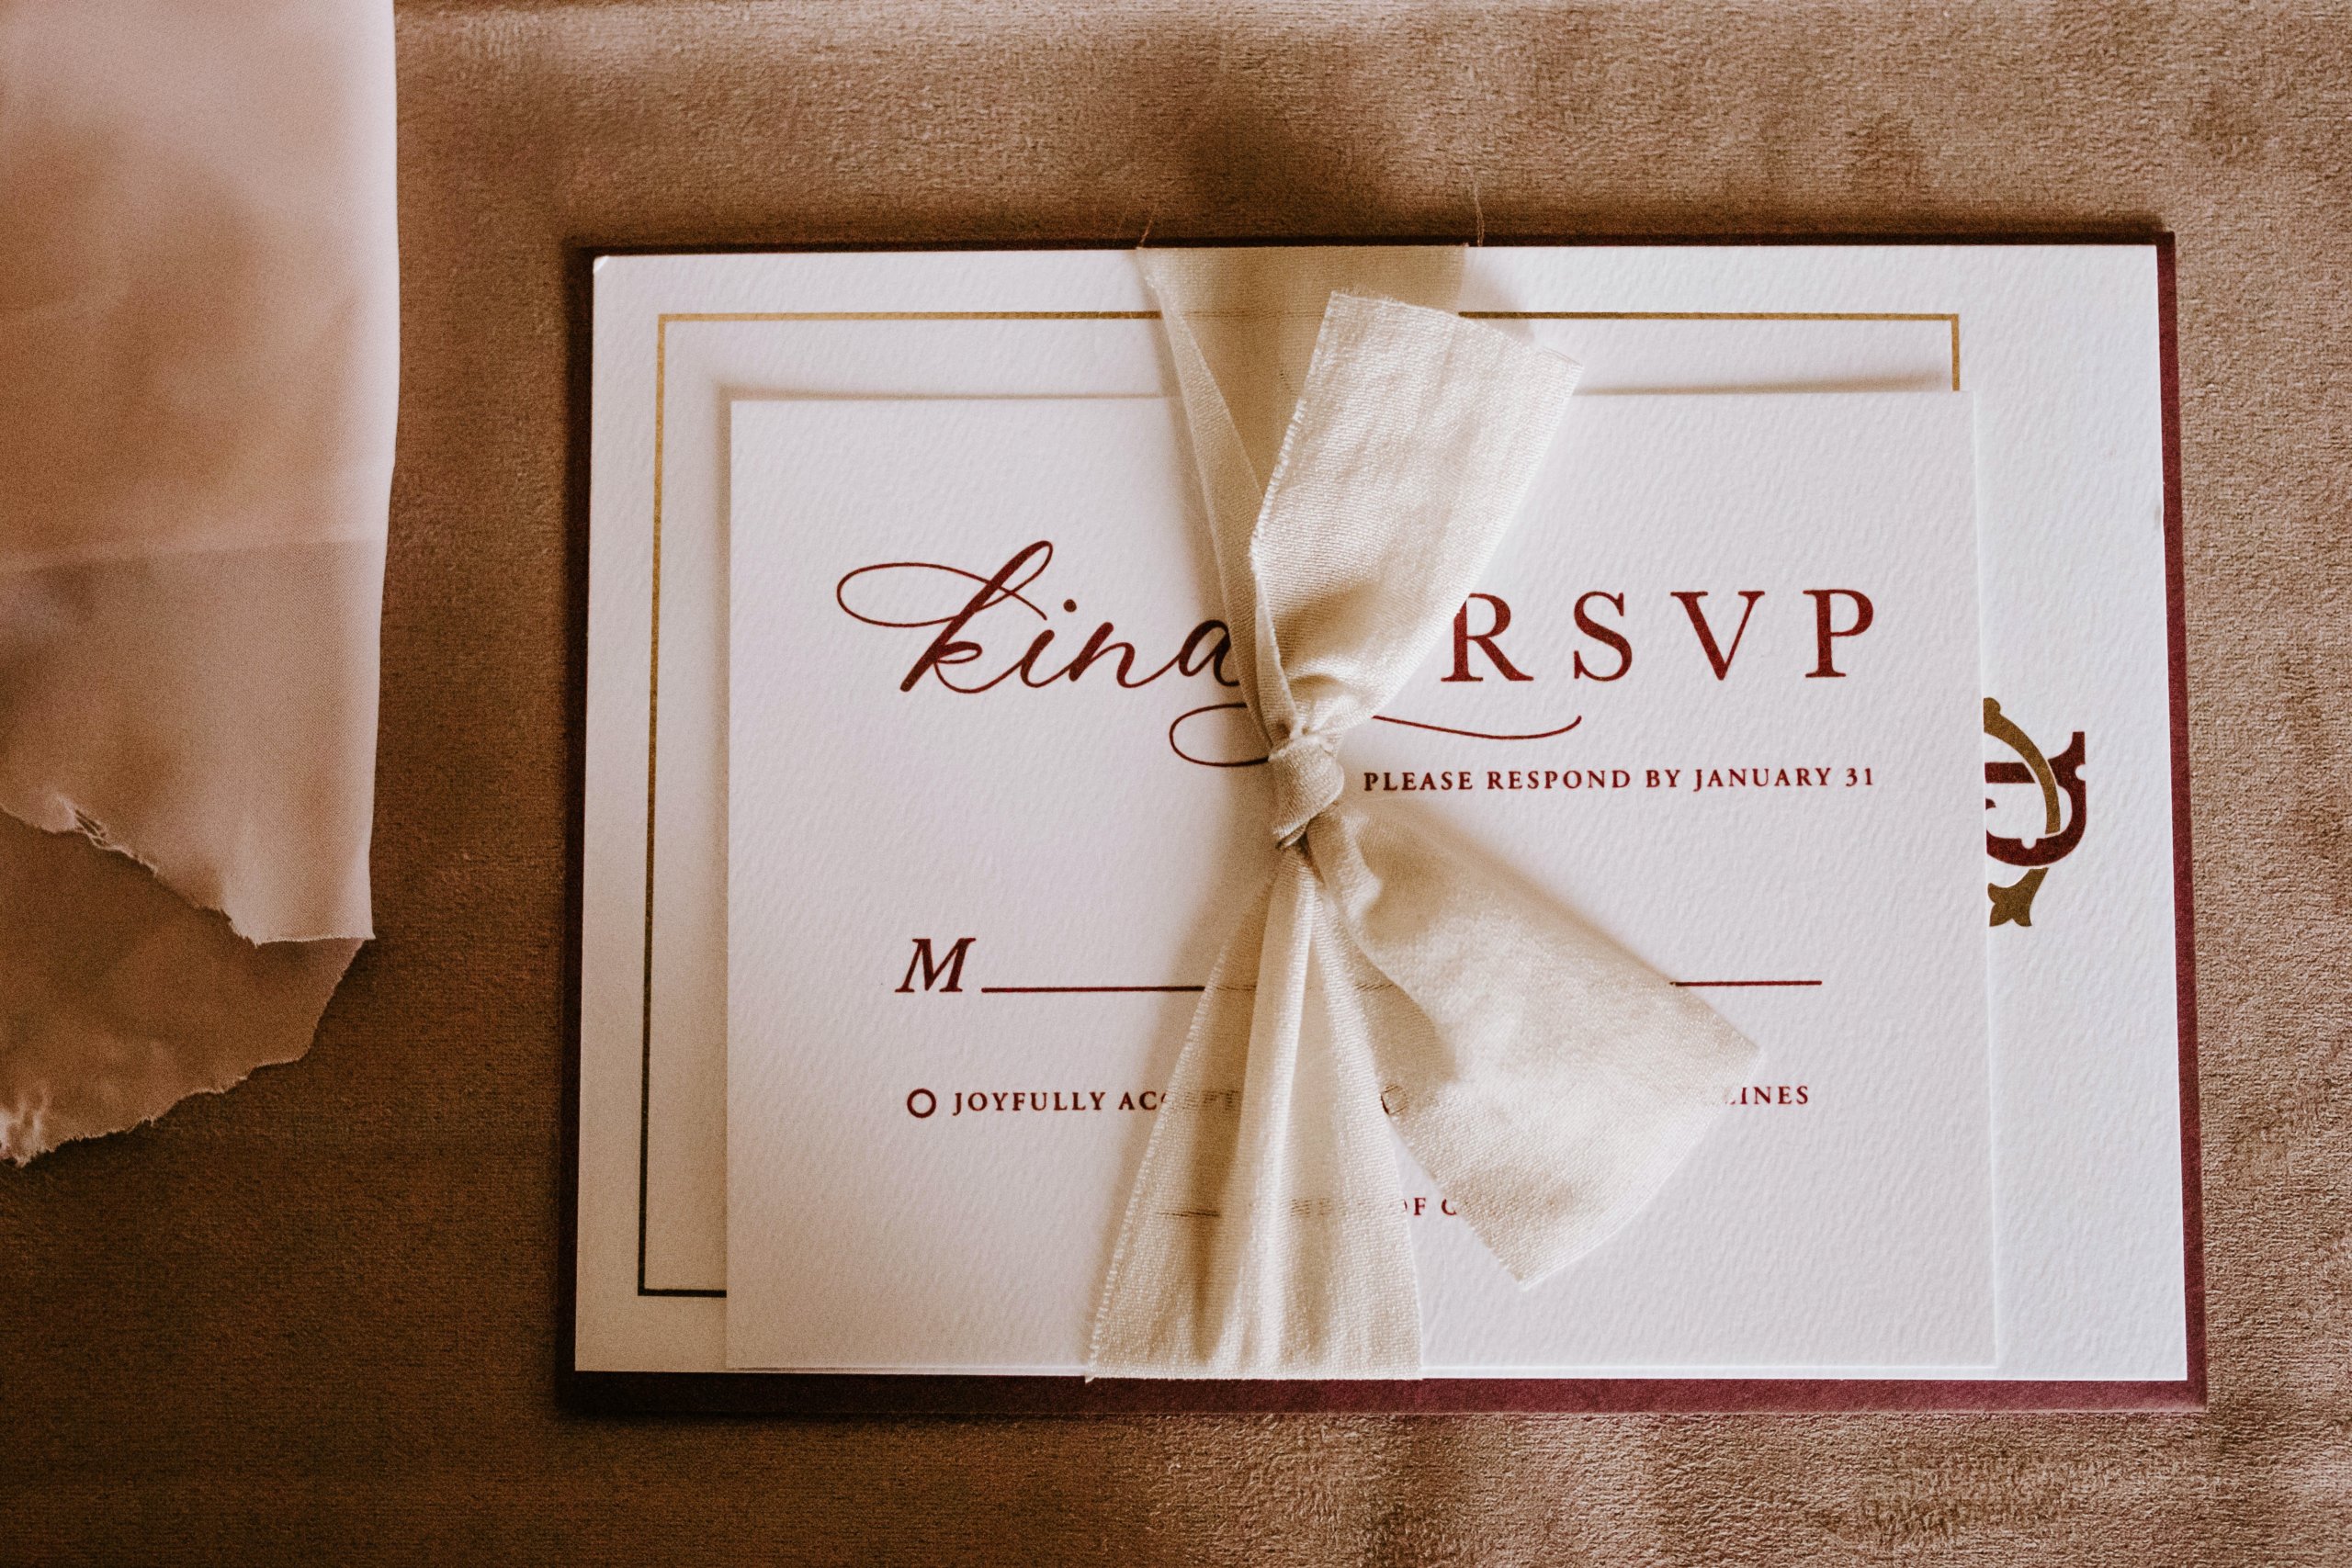 Top tips for the perfect event invites